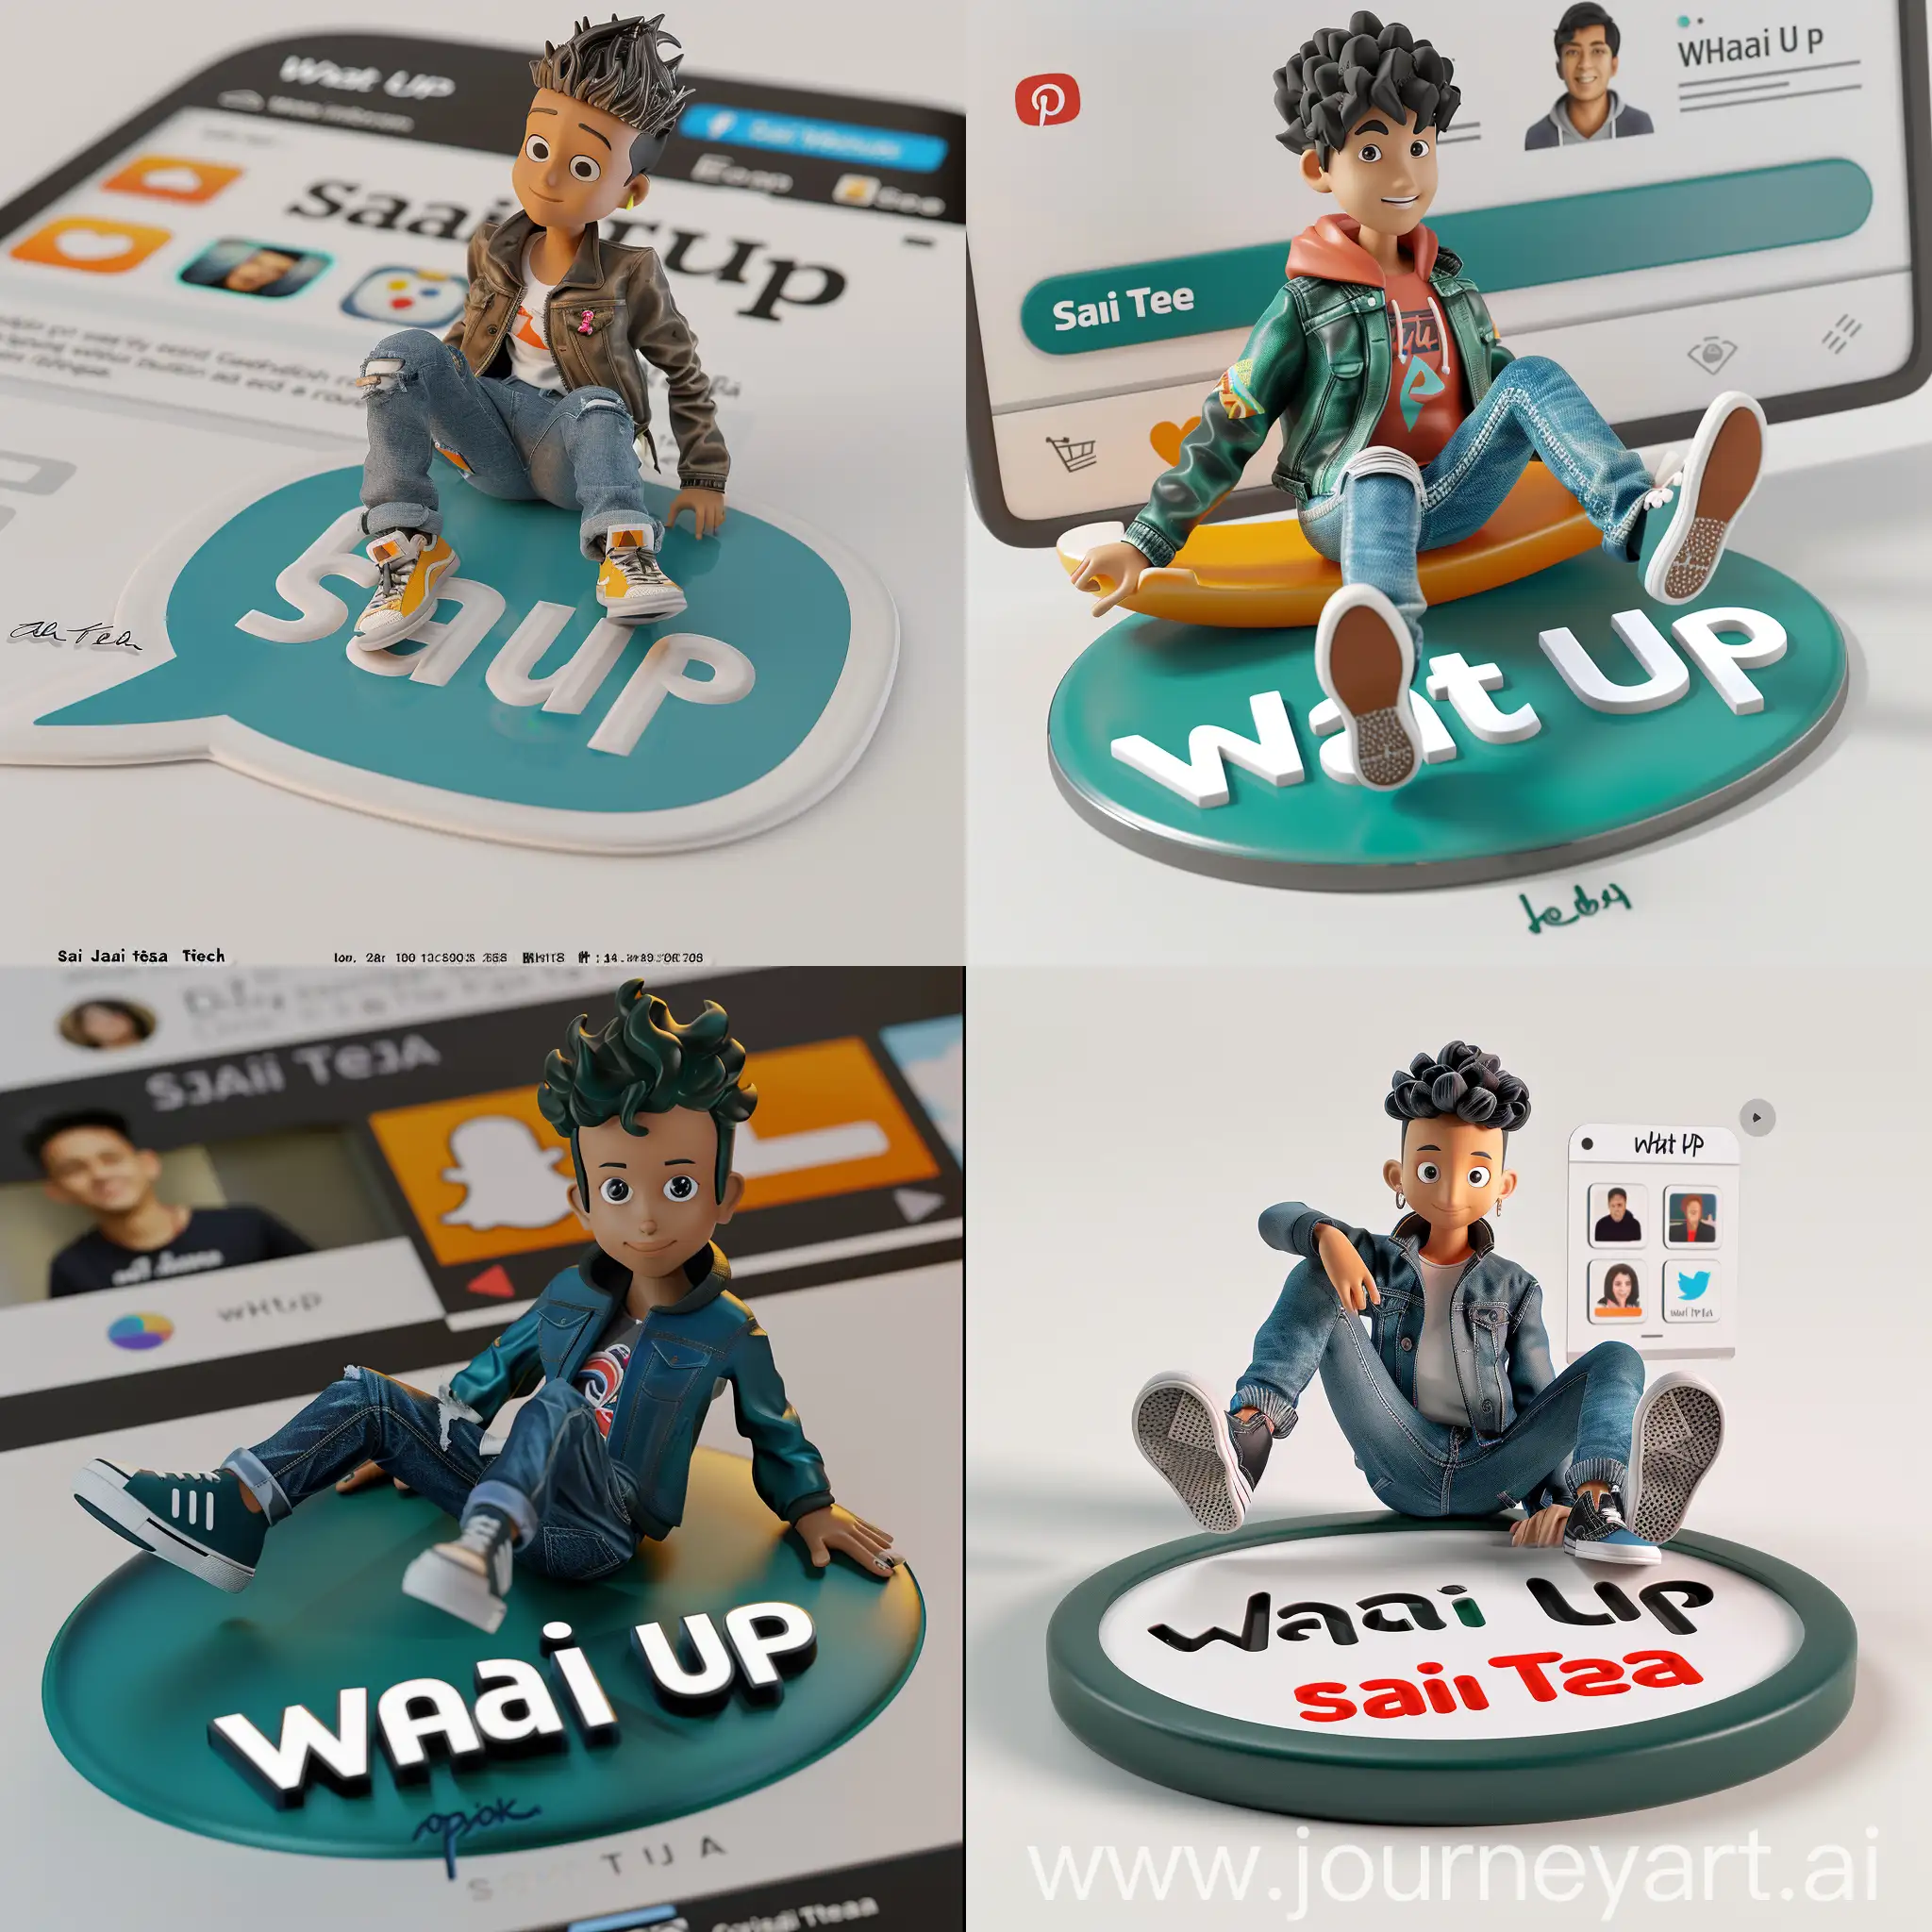 Create a 3D illustration of an animated character sitting casually on top of a social media logo "whats up". The character must wear casual modern clothing such as jeans jacket and sneakers shoes. The background of the image is a social media profile page with a user name "sai teja" and a profile picture that match.